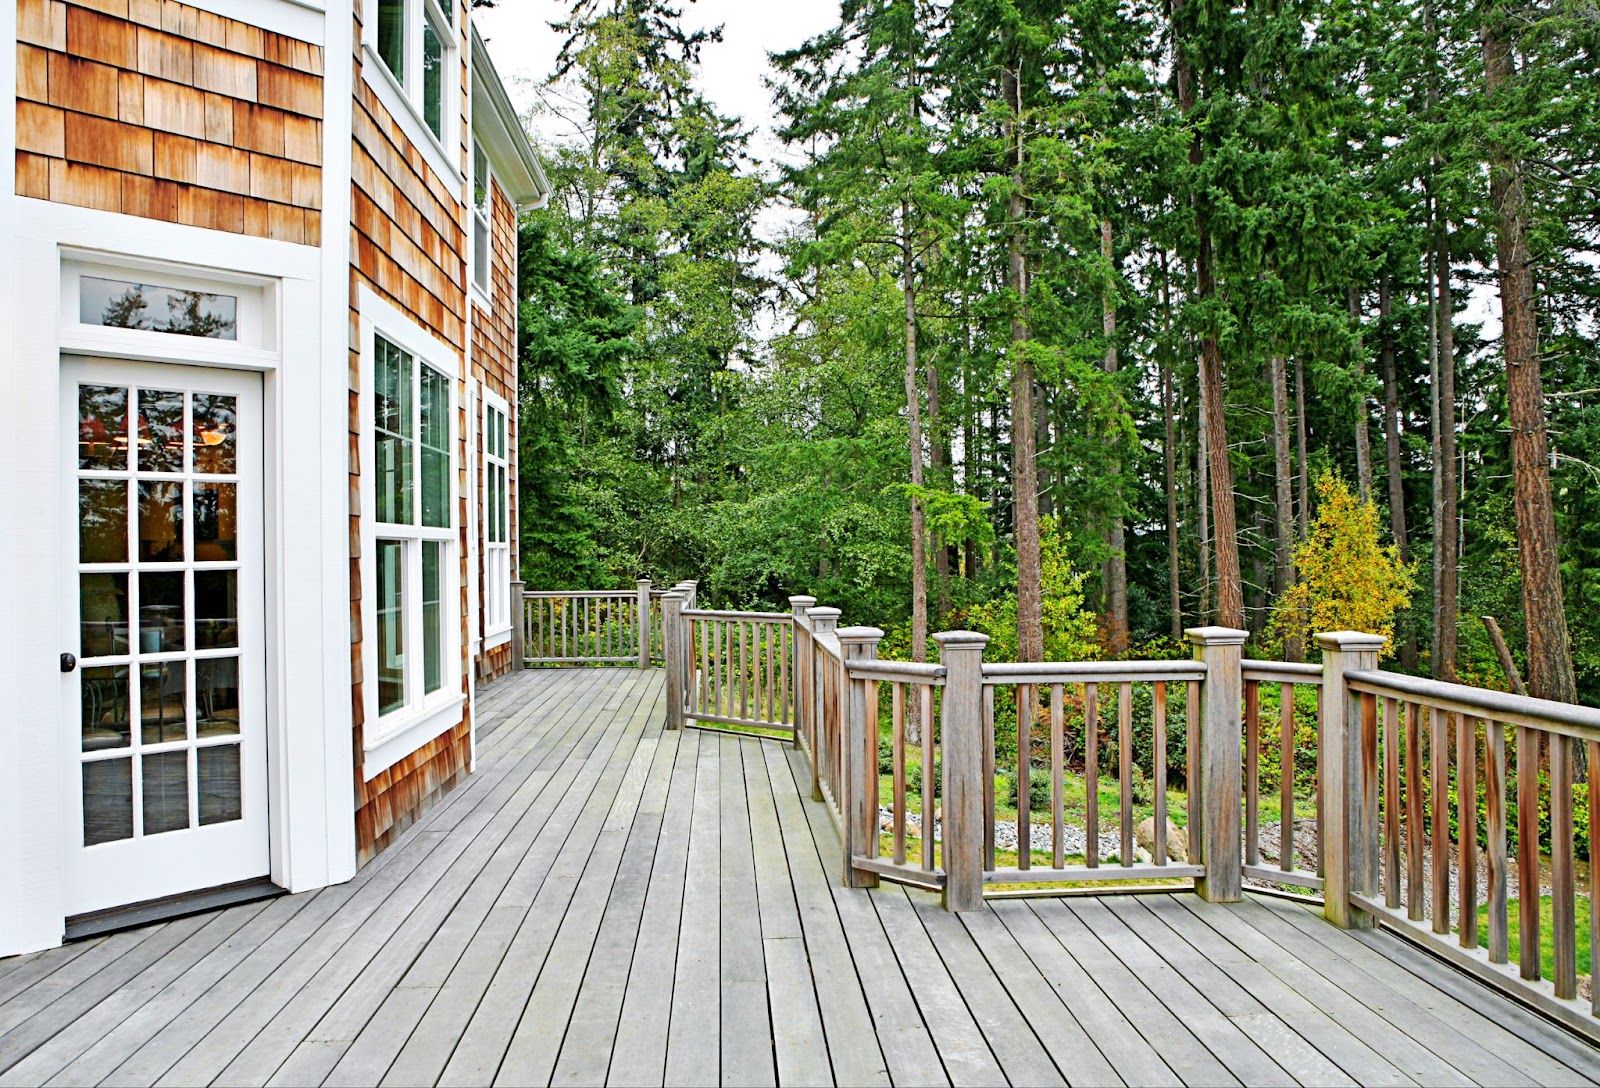 Large wooden deck attached to a wooden house with white framing.